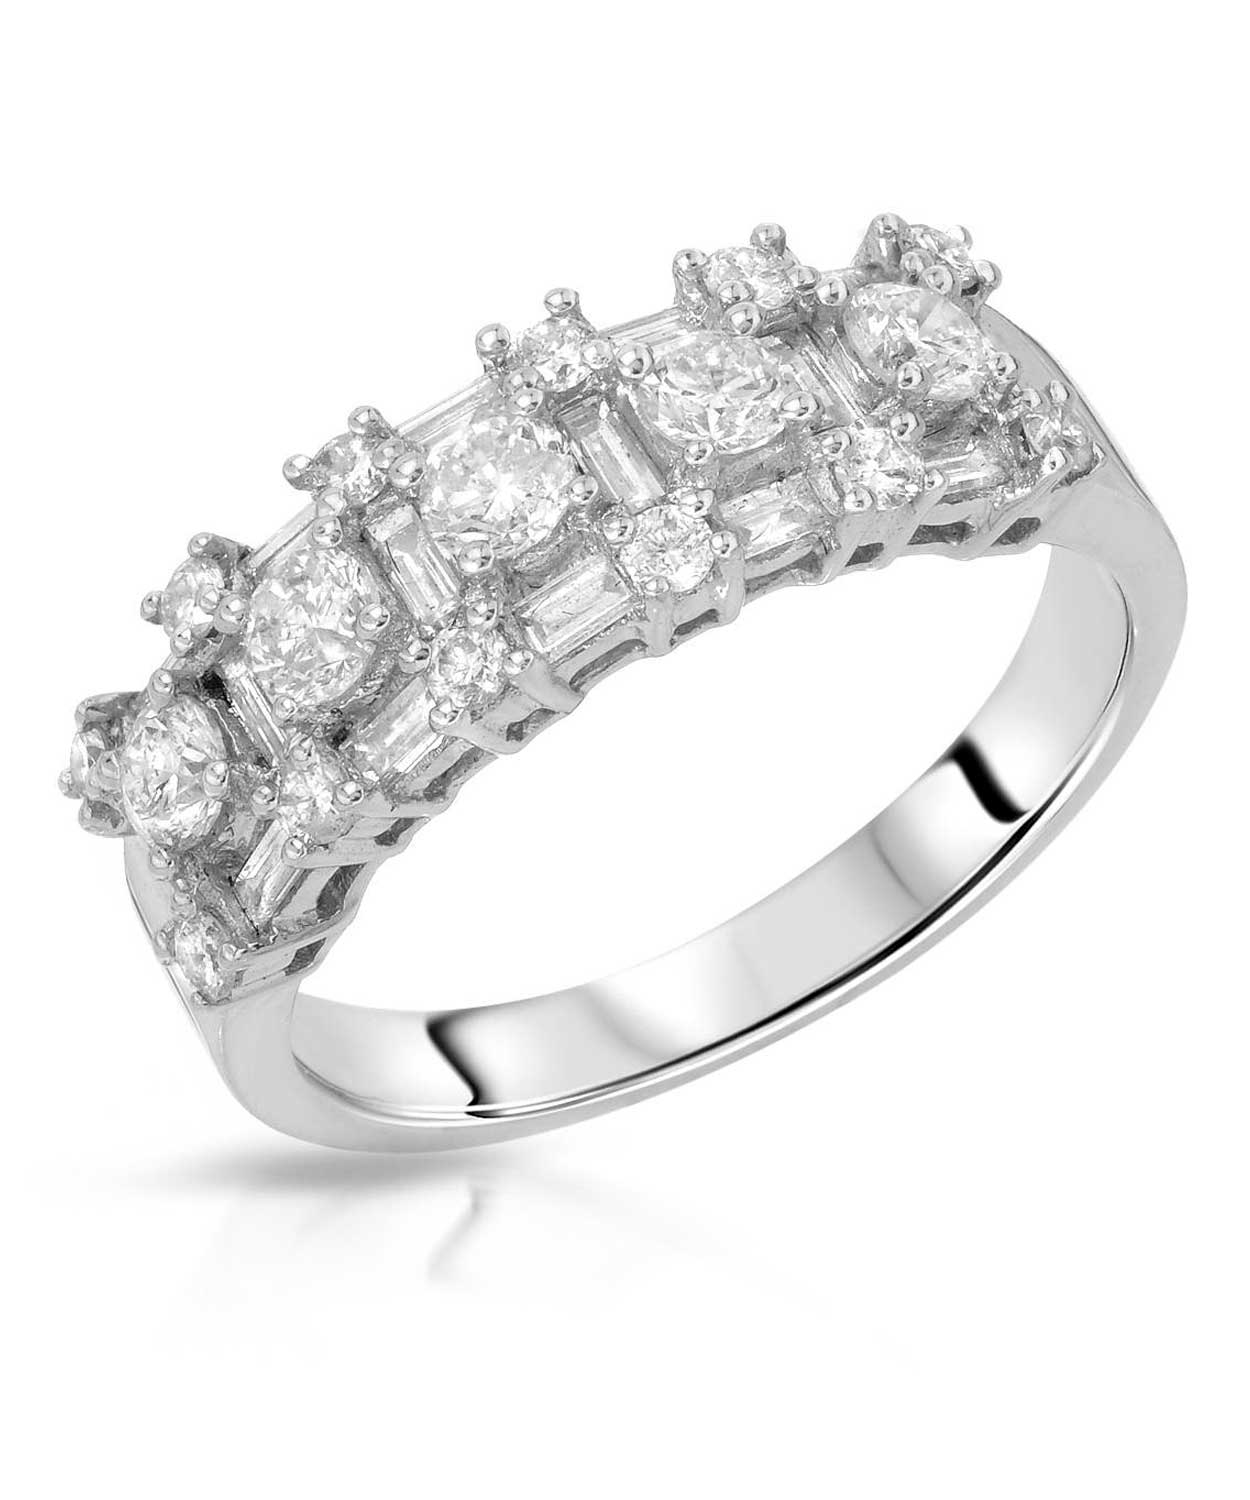 Signature Collection 1.20 ctw Diamond 18k White Gold Elegant Right Hand Ring View 1